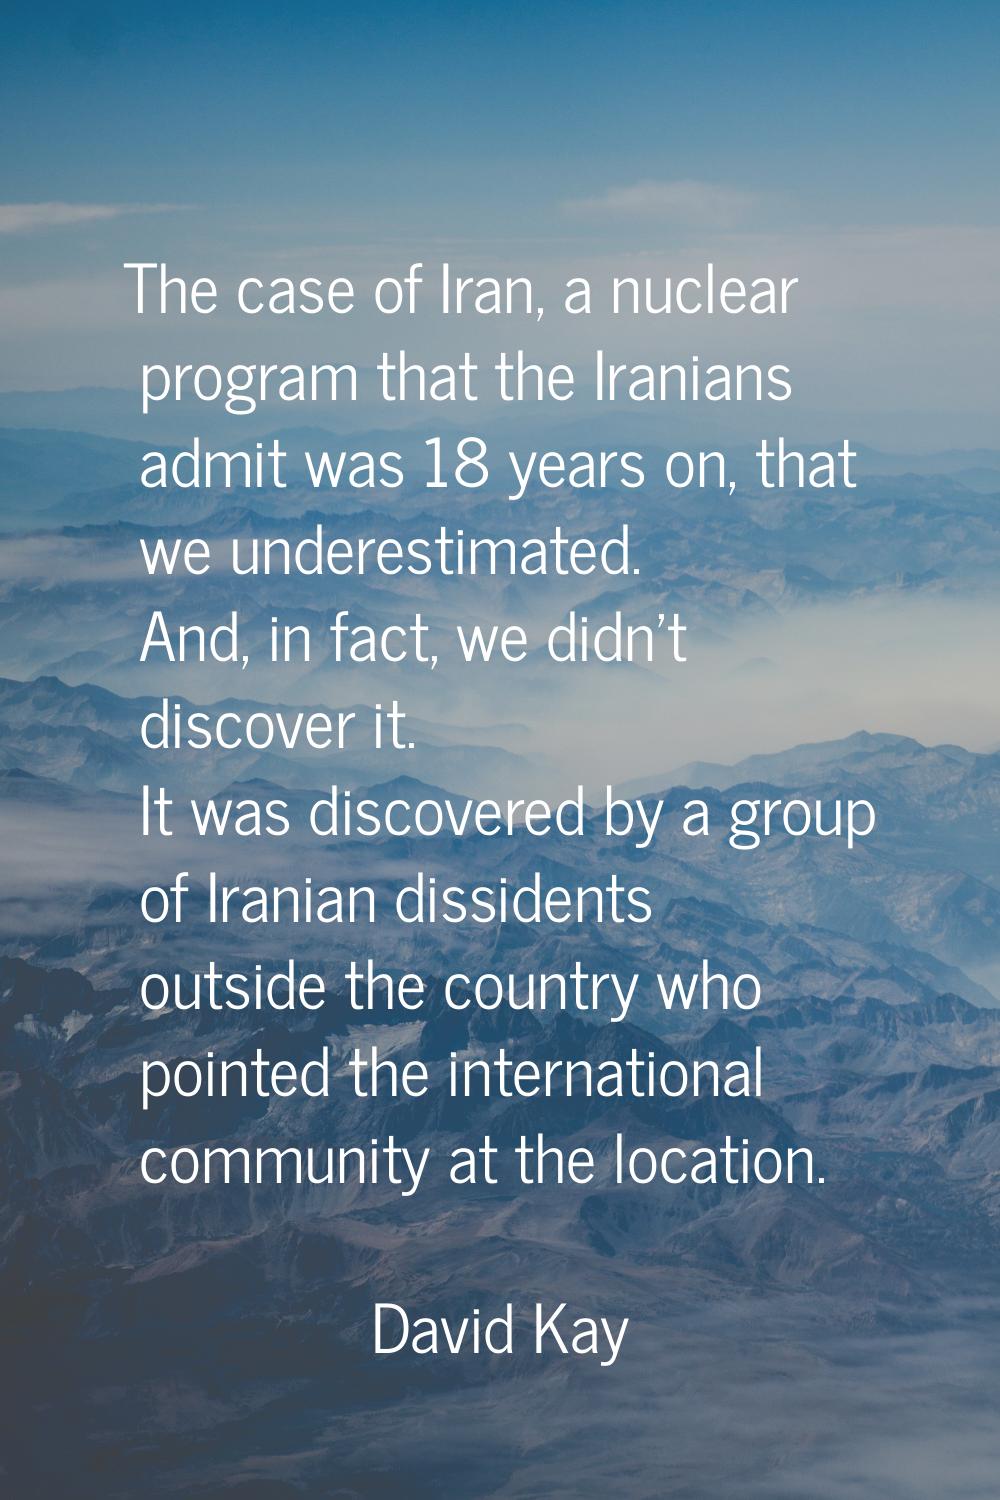 The case of Iran, a nuclear program that the Iranians admit was 18 years on, that we underestimated